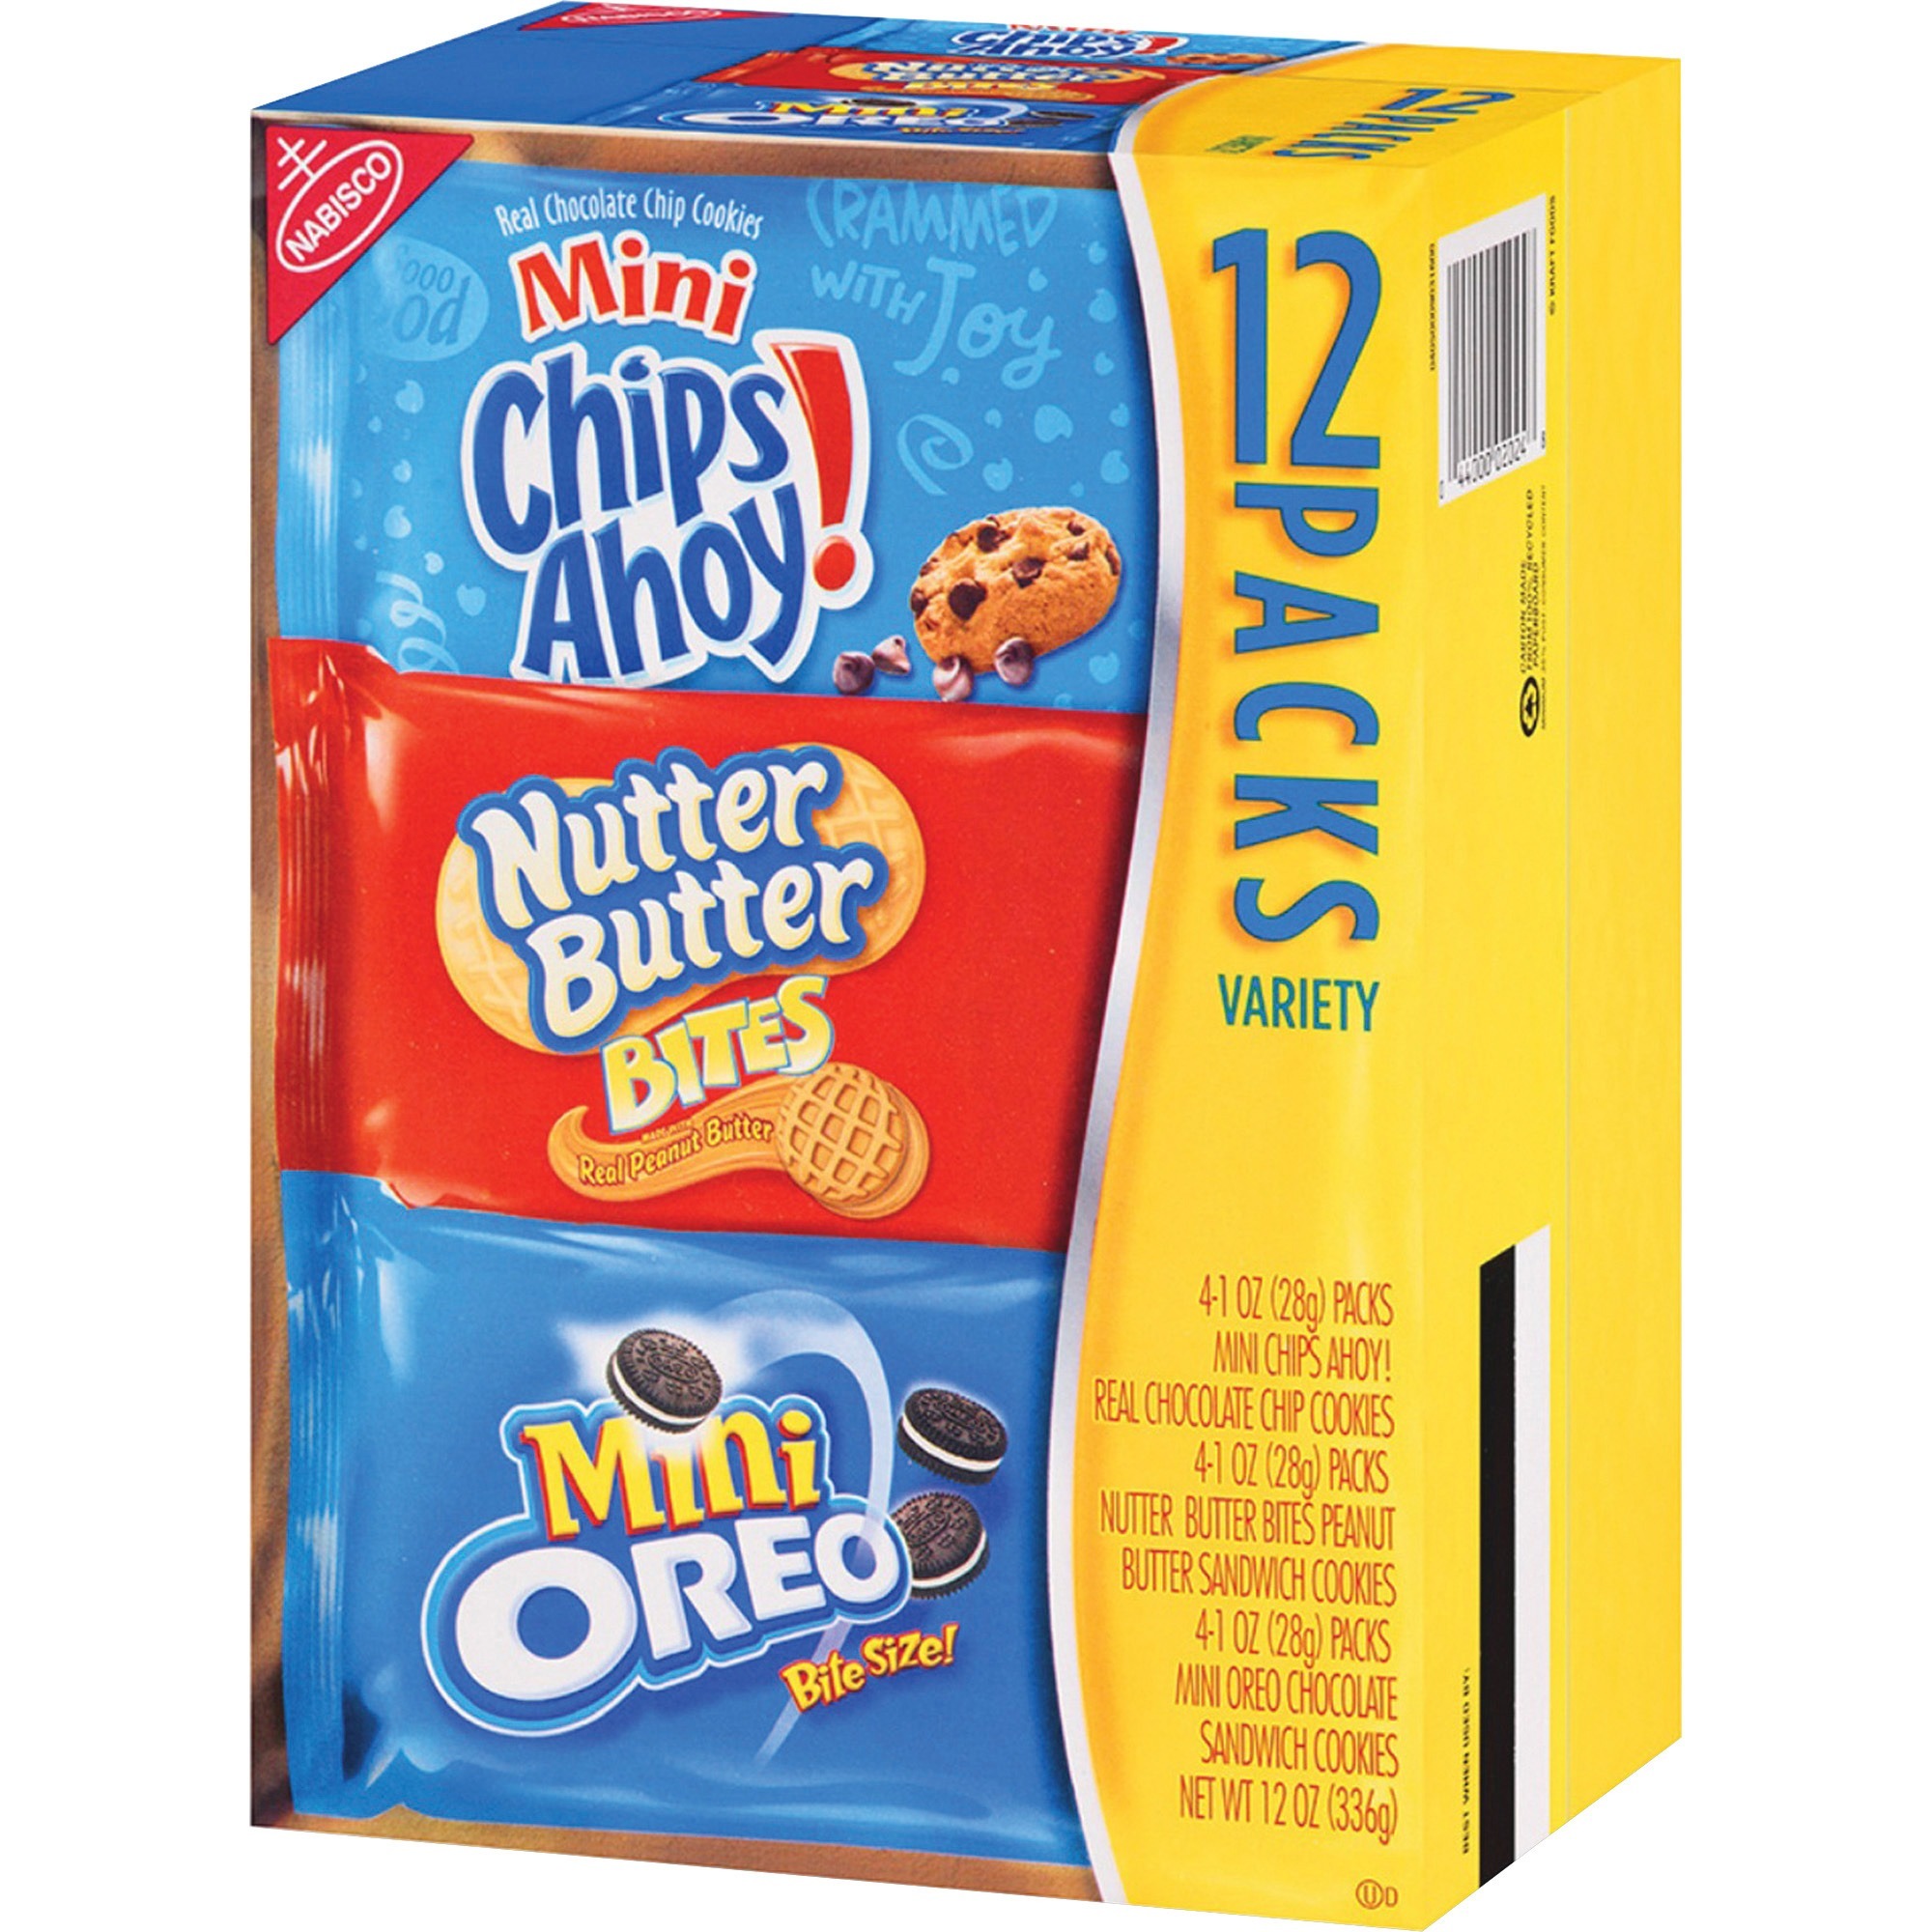 Nfg02024 Nabisco Bite Size Cookie Variety Pack Office Advantage